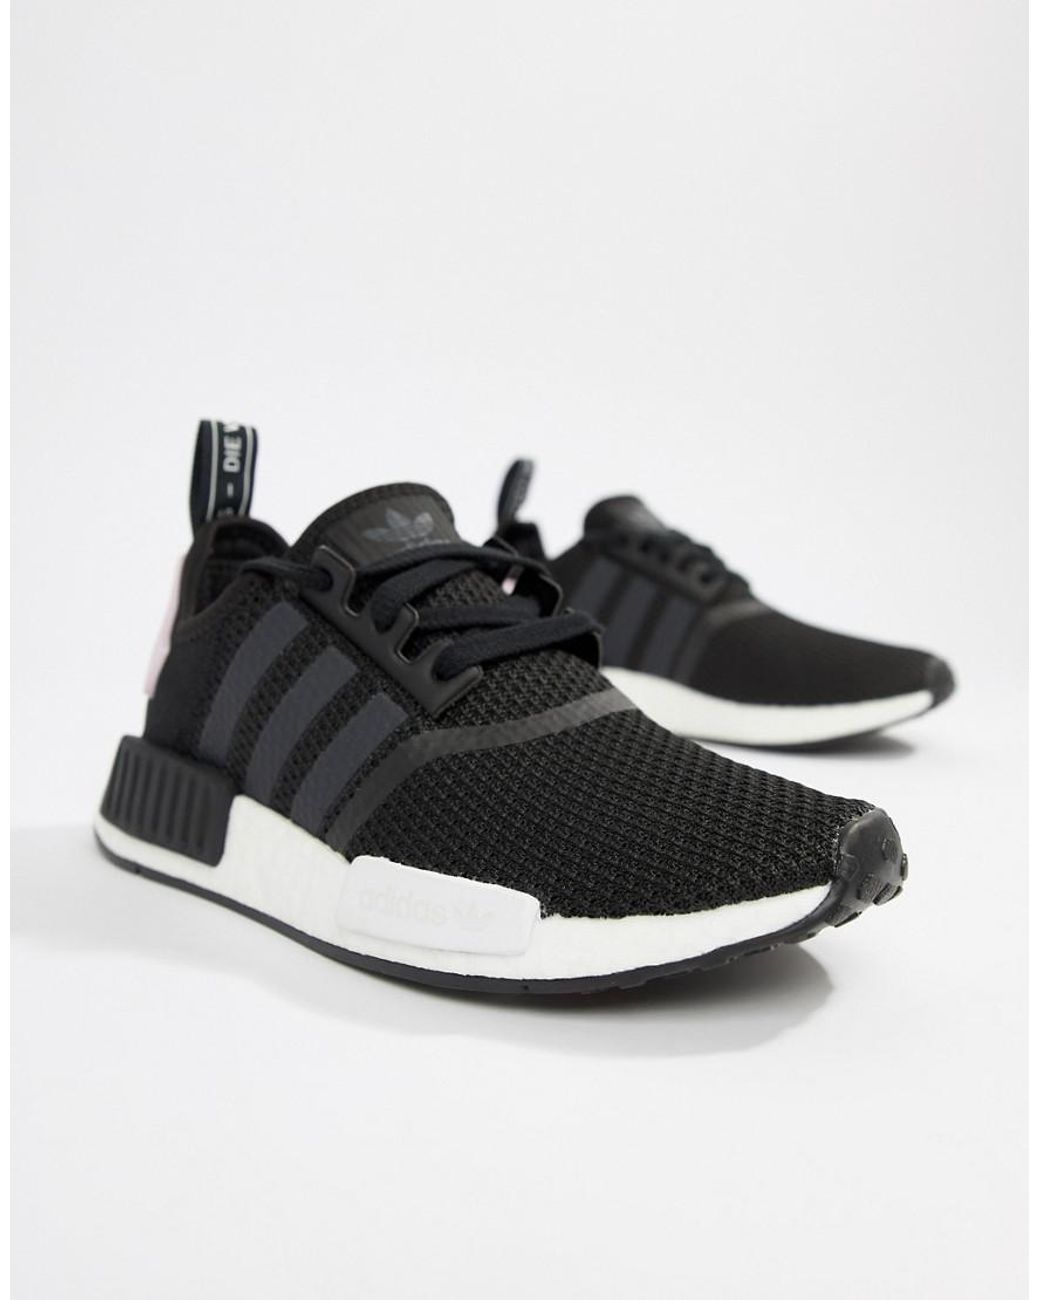 adidas Originals Nmd R1 Sneakers In Black And Pink | Lyst